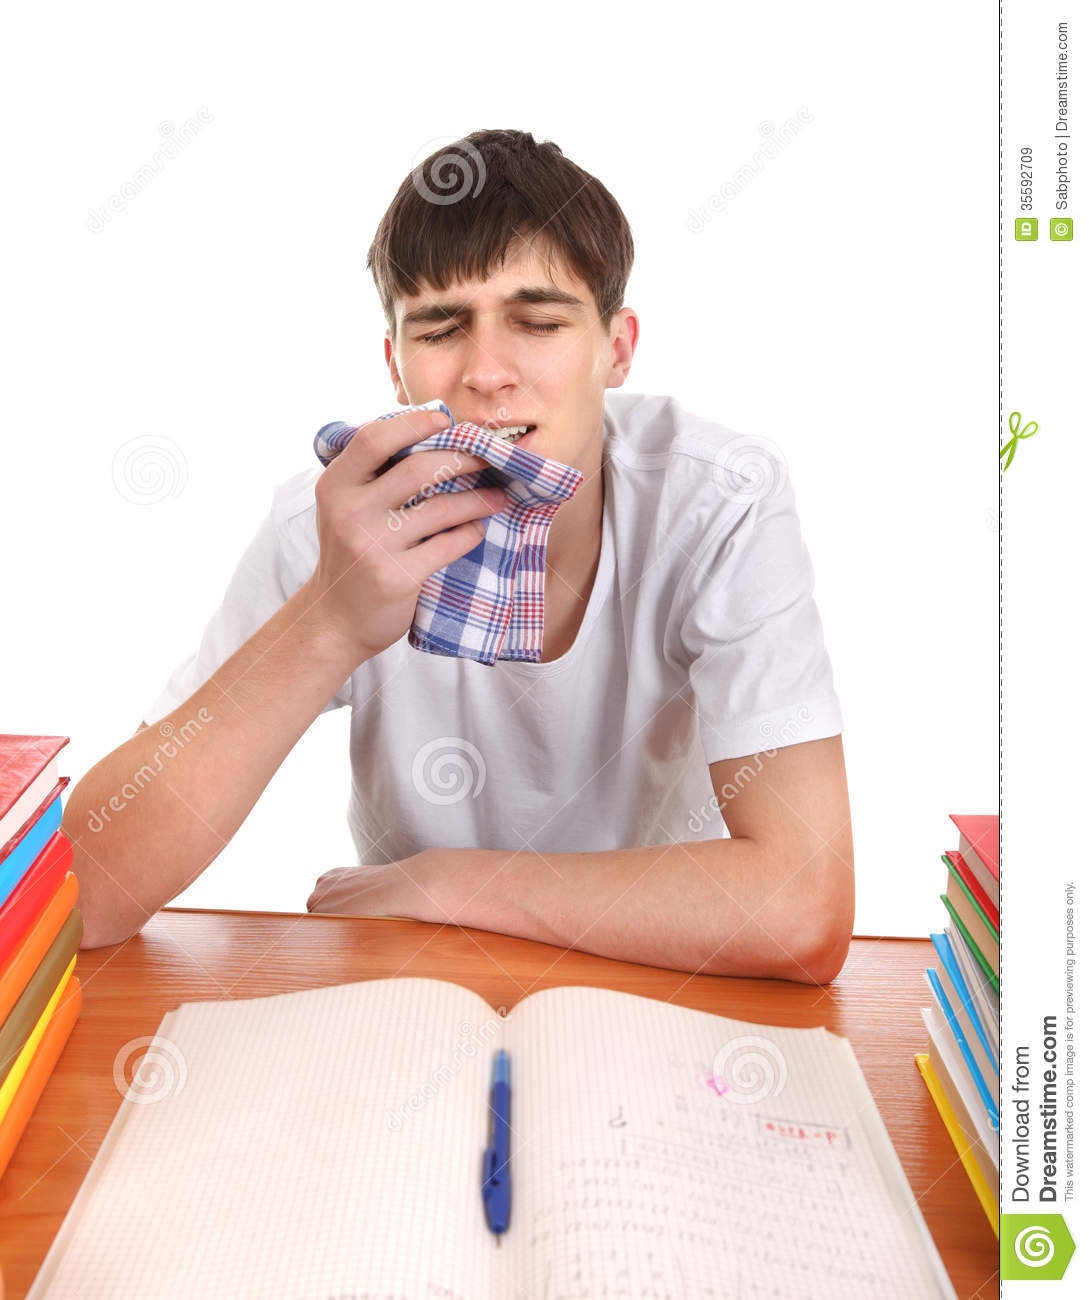 Sick Student At The School Desk Isolated On The White Background